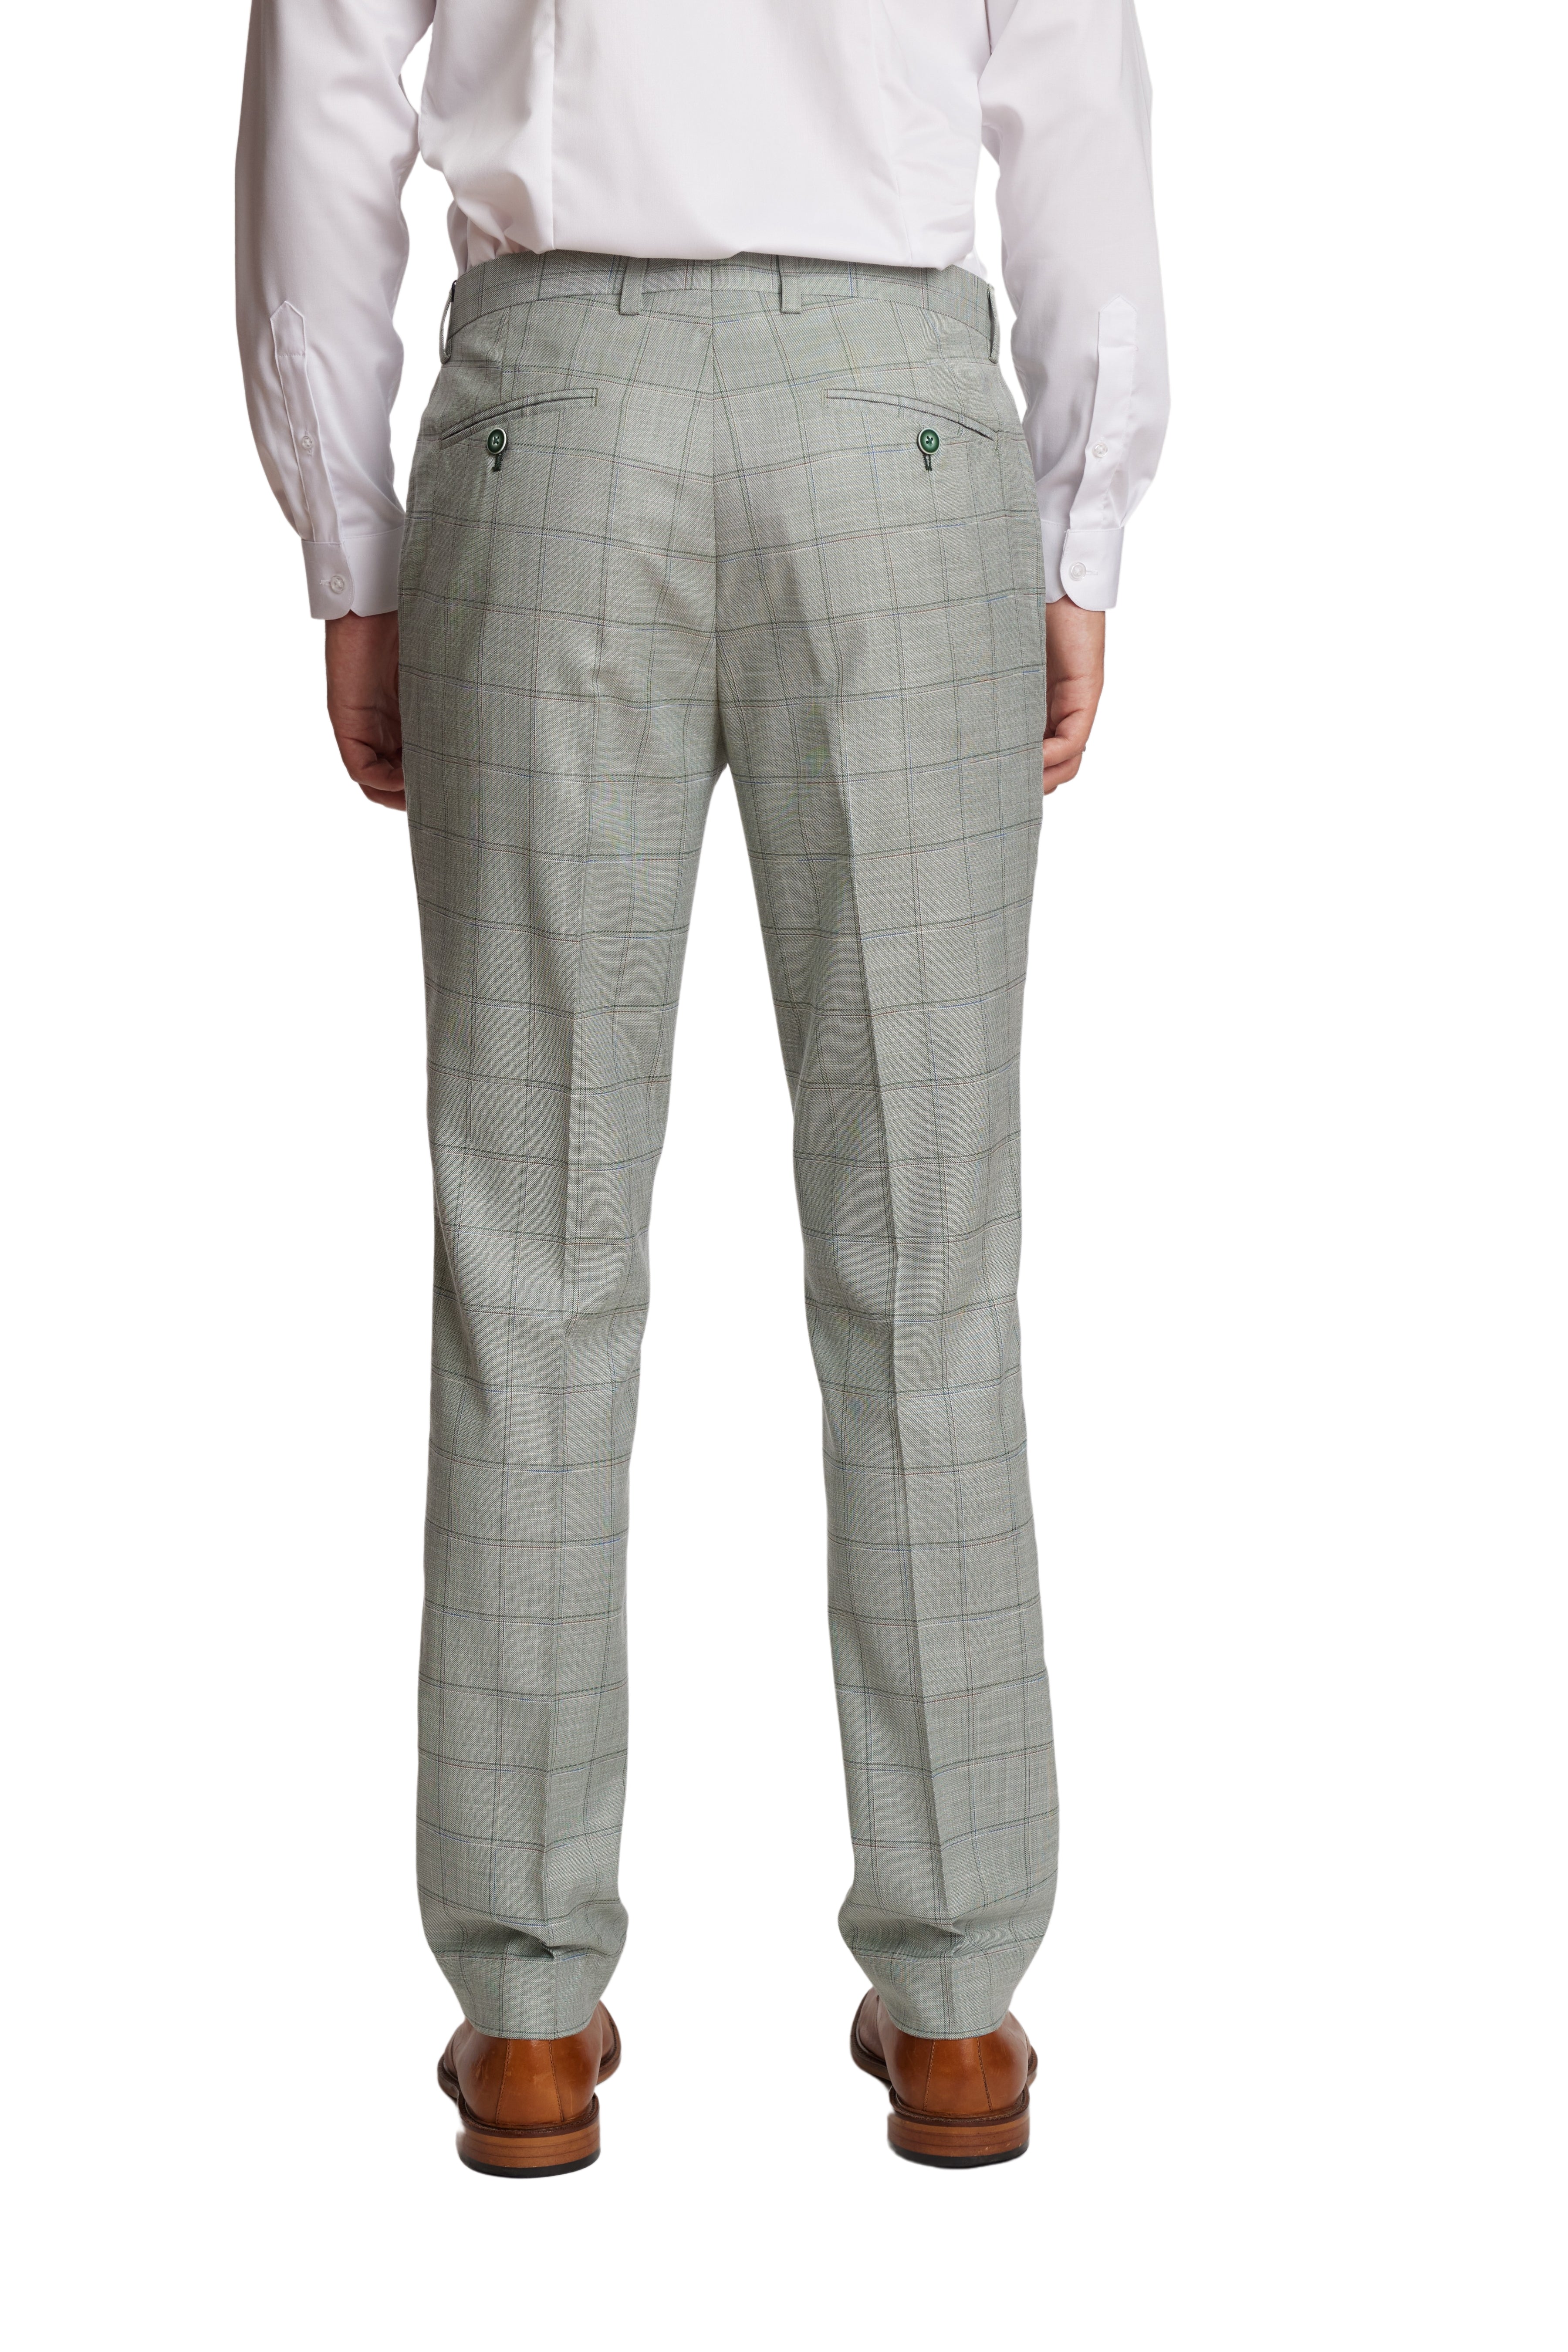 Downing Pants - slim - Green Double Check